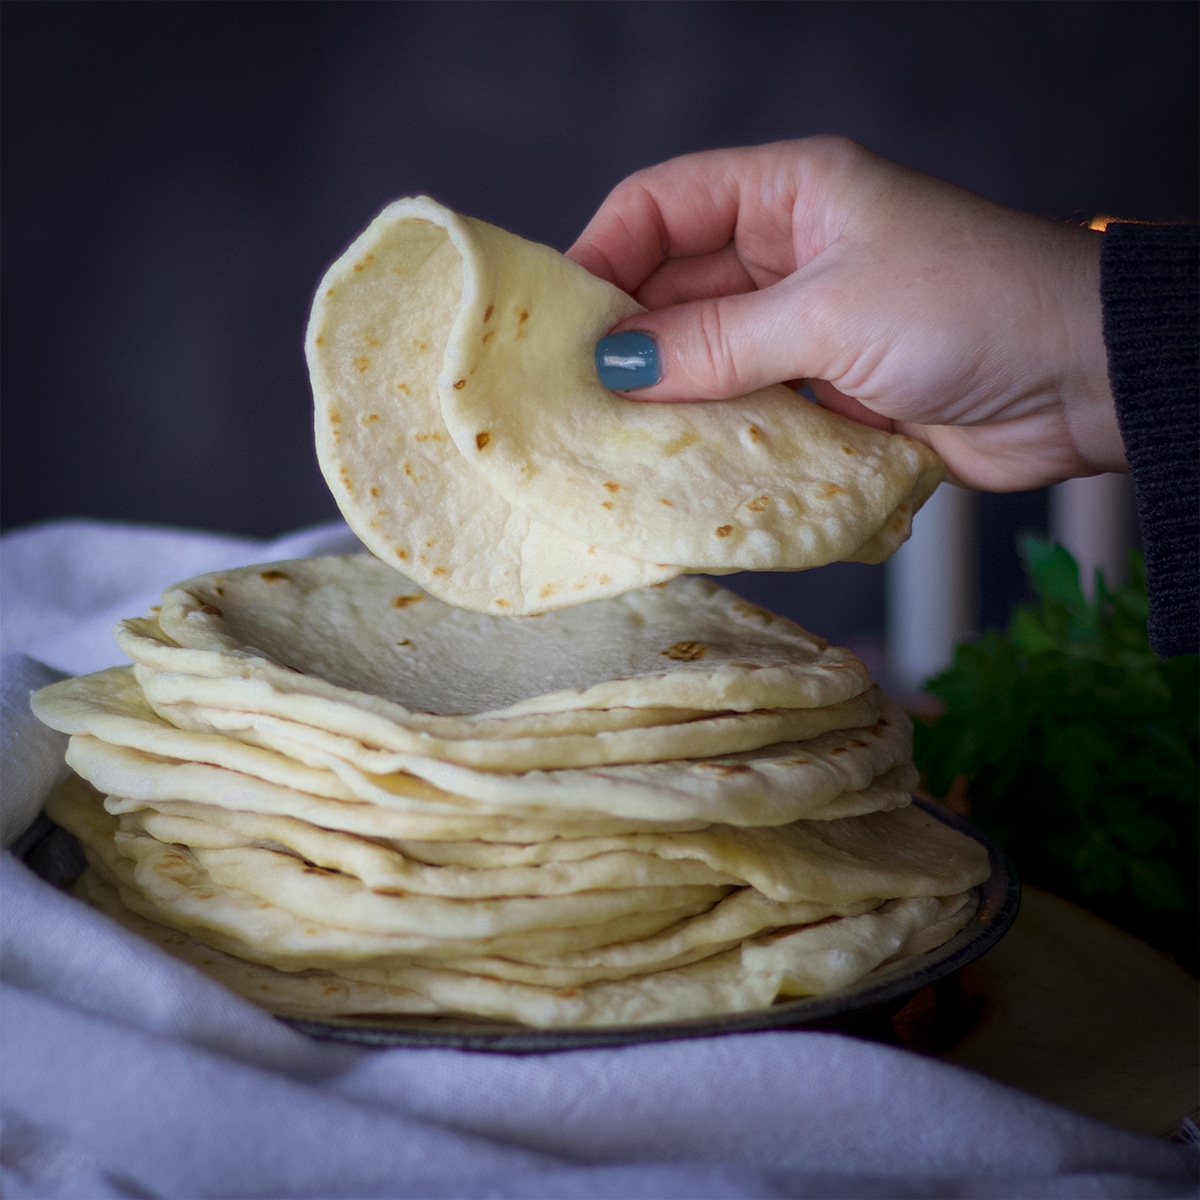 Someone lifting a homemade flour tortillas from a large stack of tortillas.